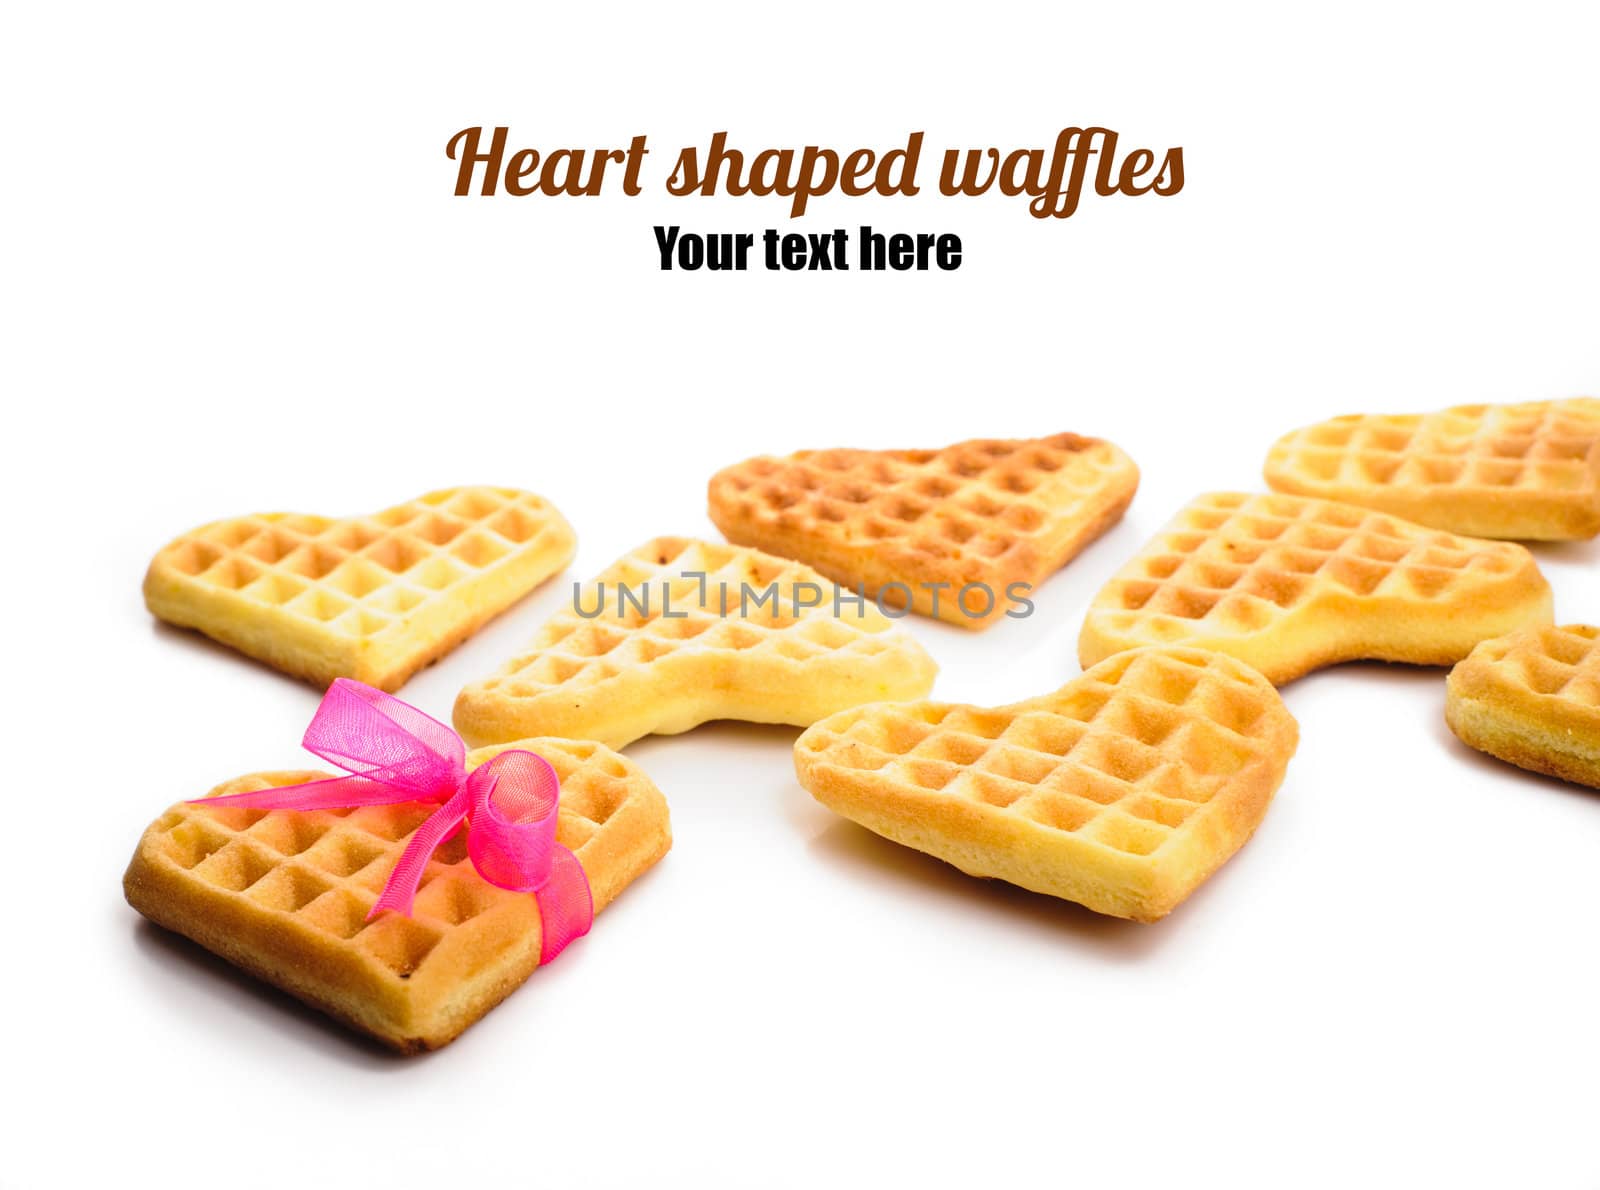 Heart shaped waffles with pink ribbon by nvelichko